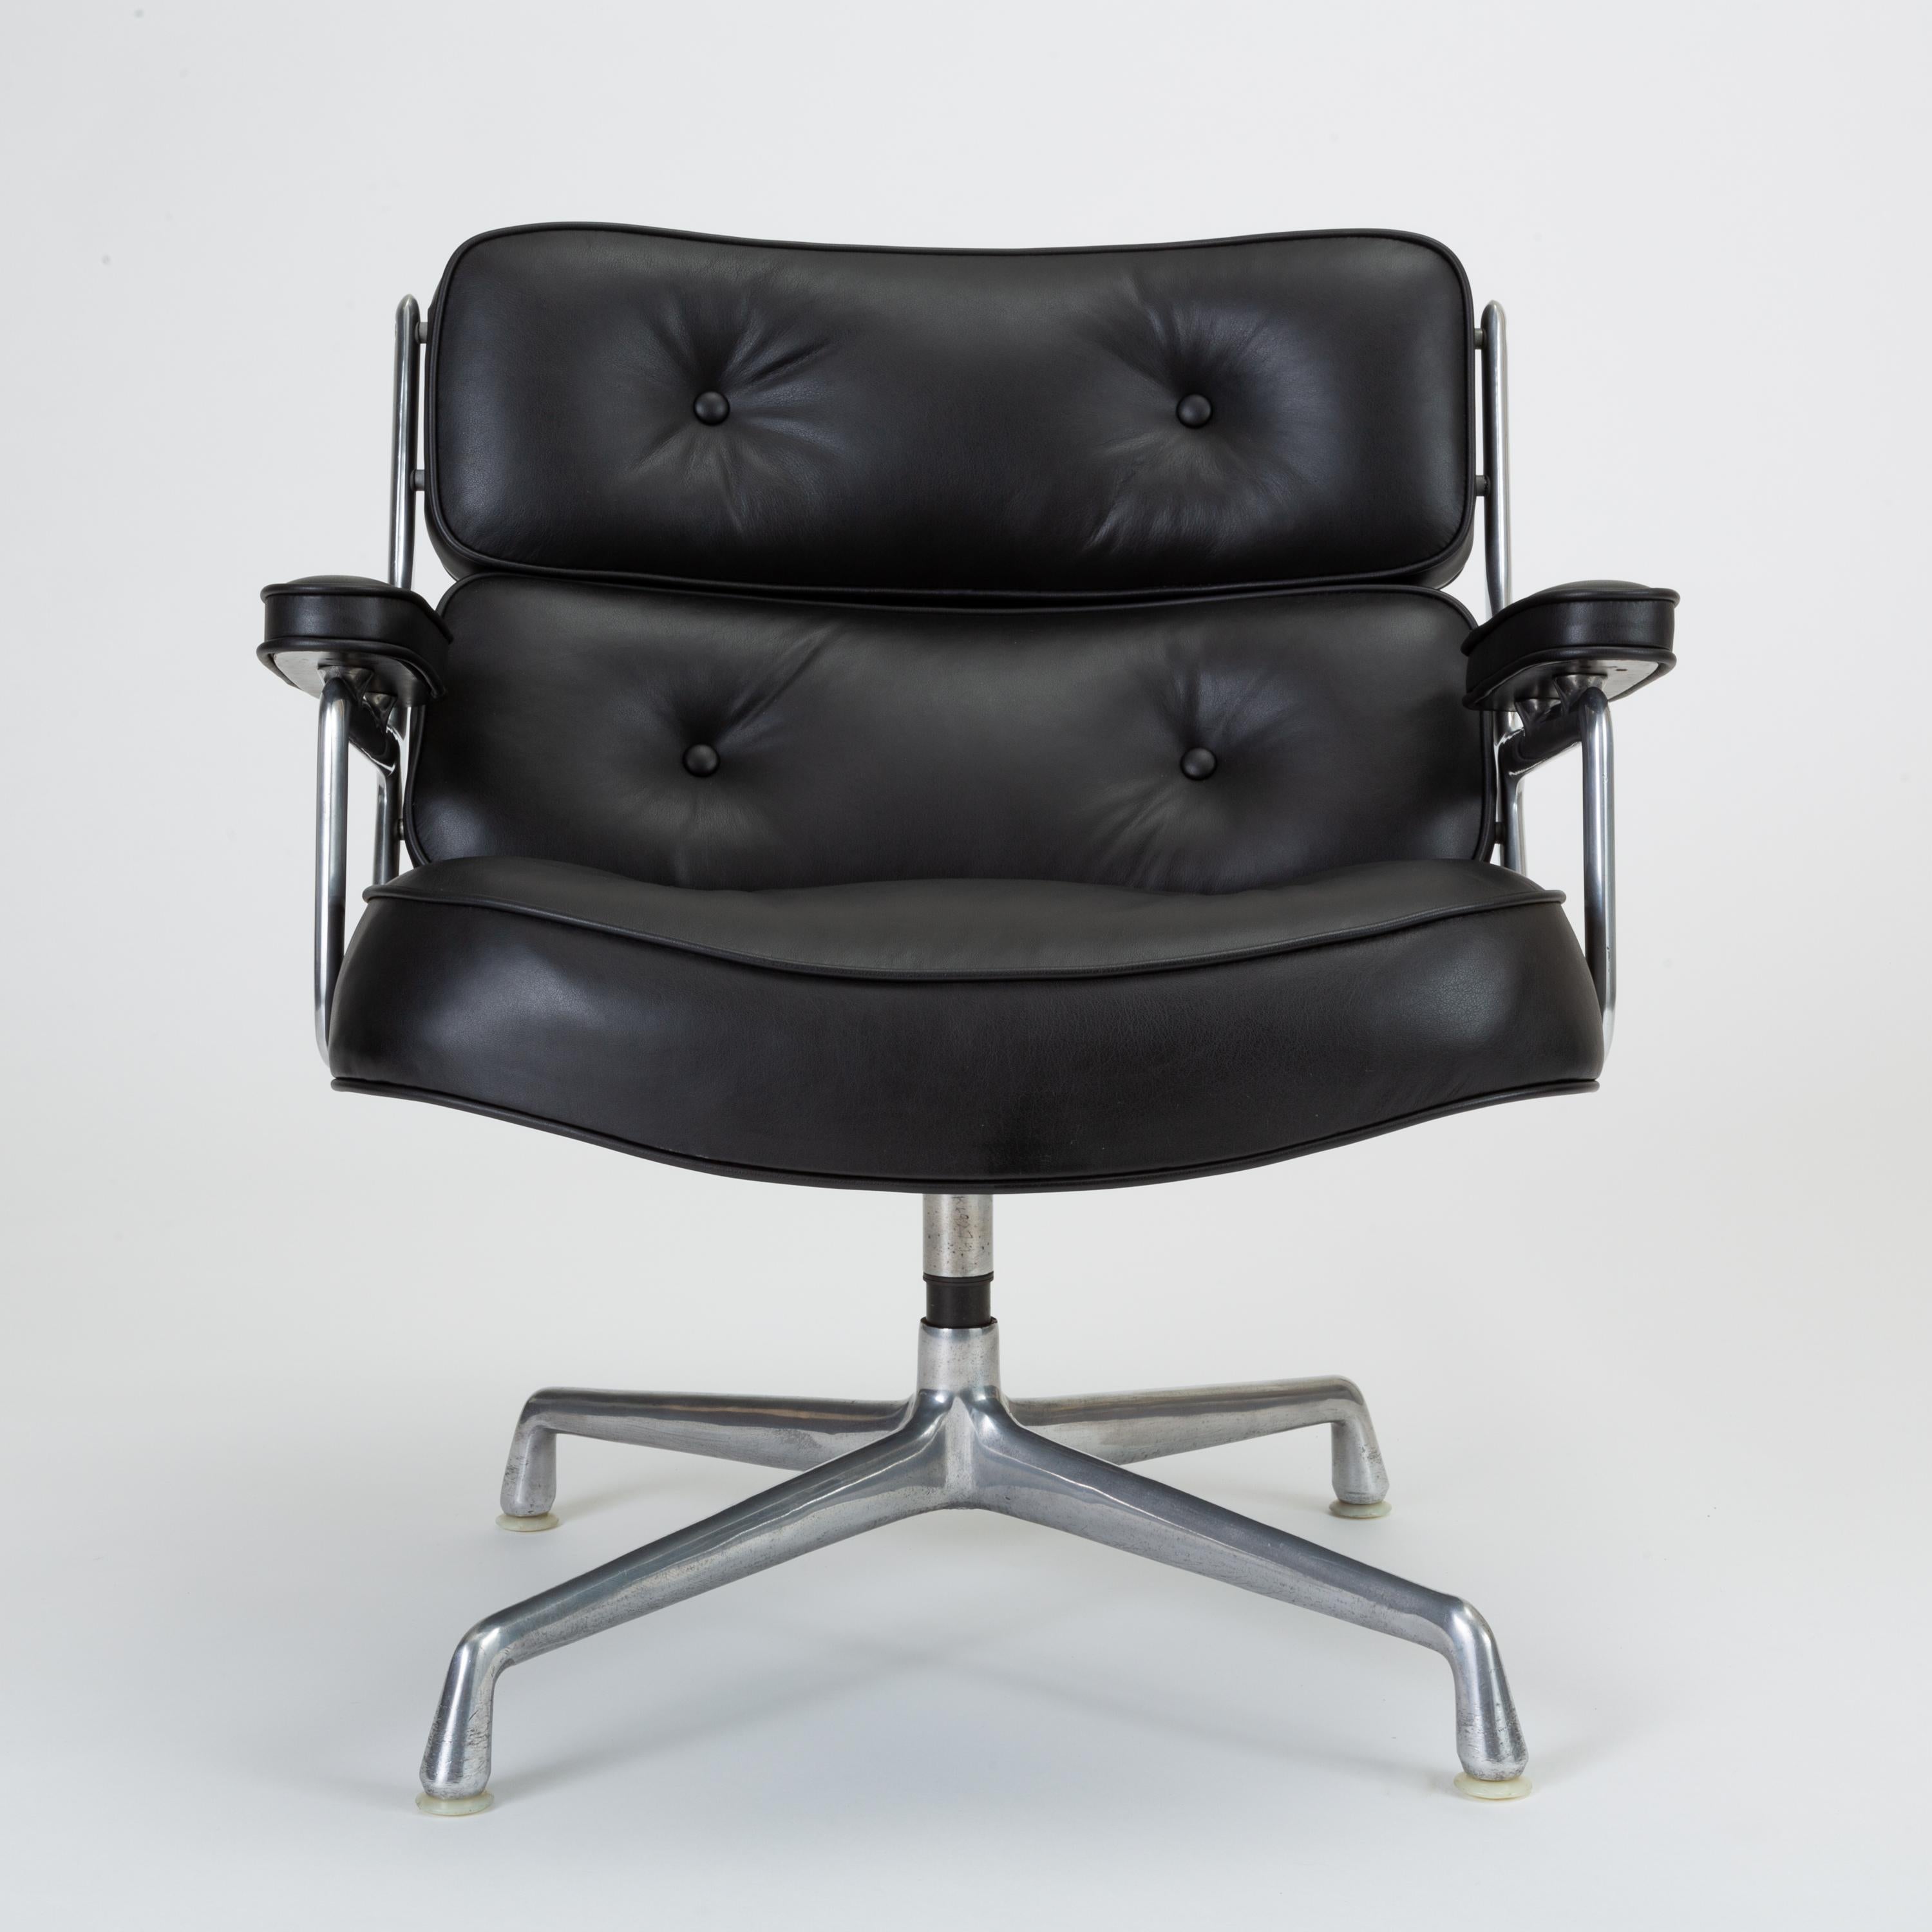 Designed in 1960 by Charles and Ray Eames for the Time Life Building in Manhattan, these chairs feature a polished aluminum frame and sumptuous tufted cushions in the original black leather. The chair sits on four plastic glides, but wheels are